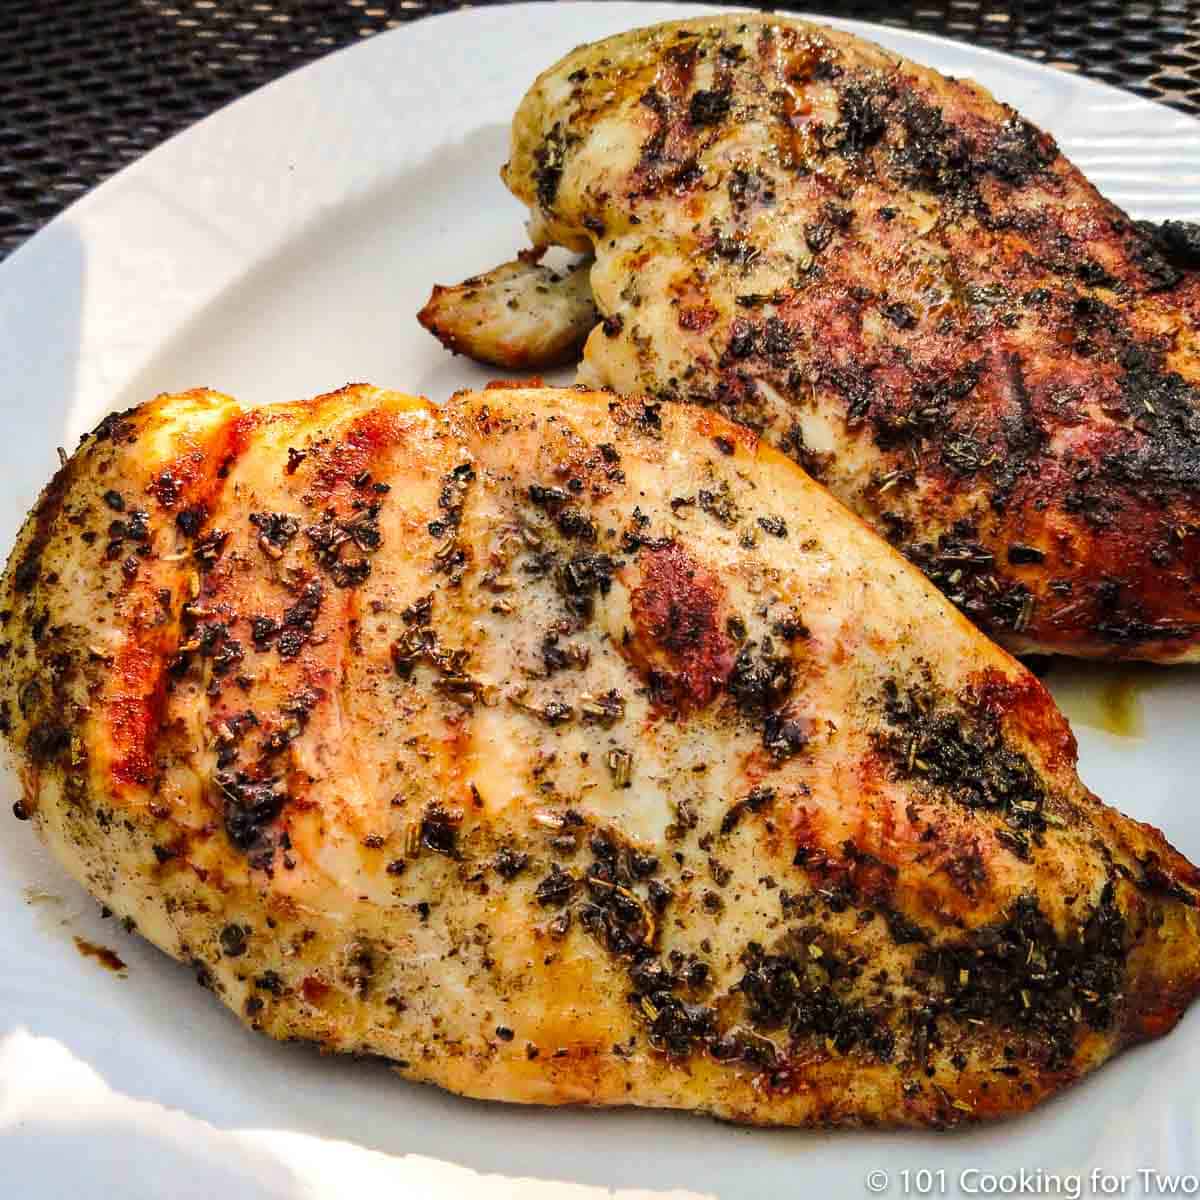 Italian Grilled Chicken Breast from 101 Cooking for Two